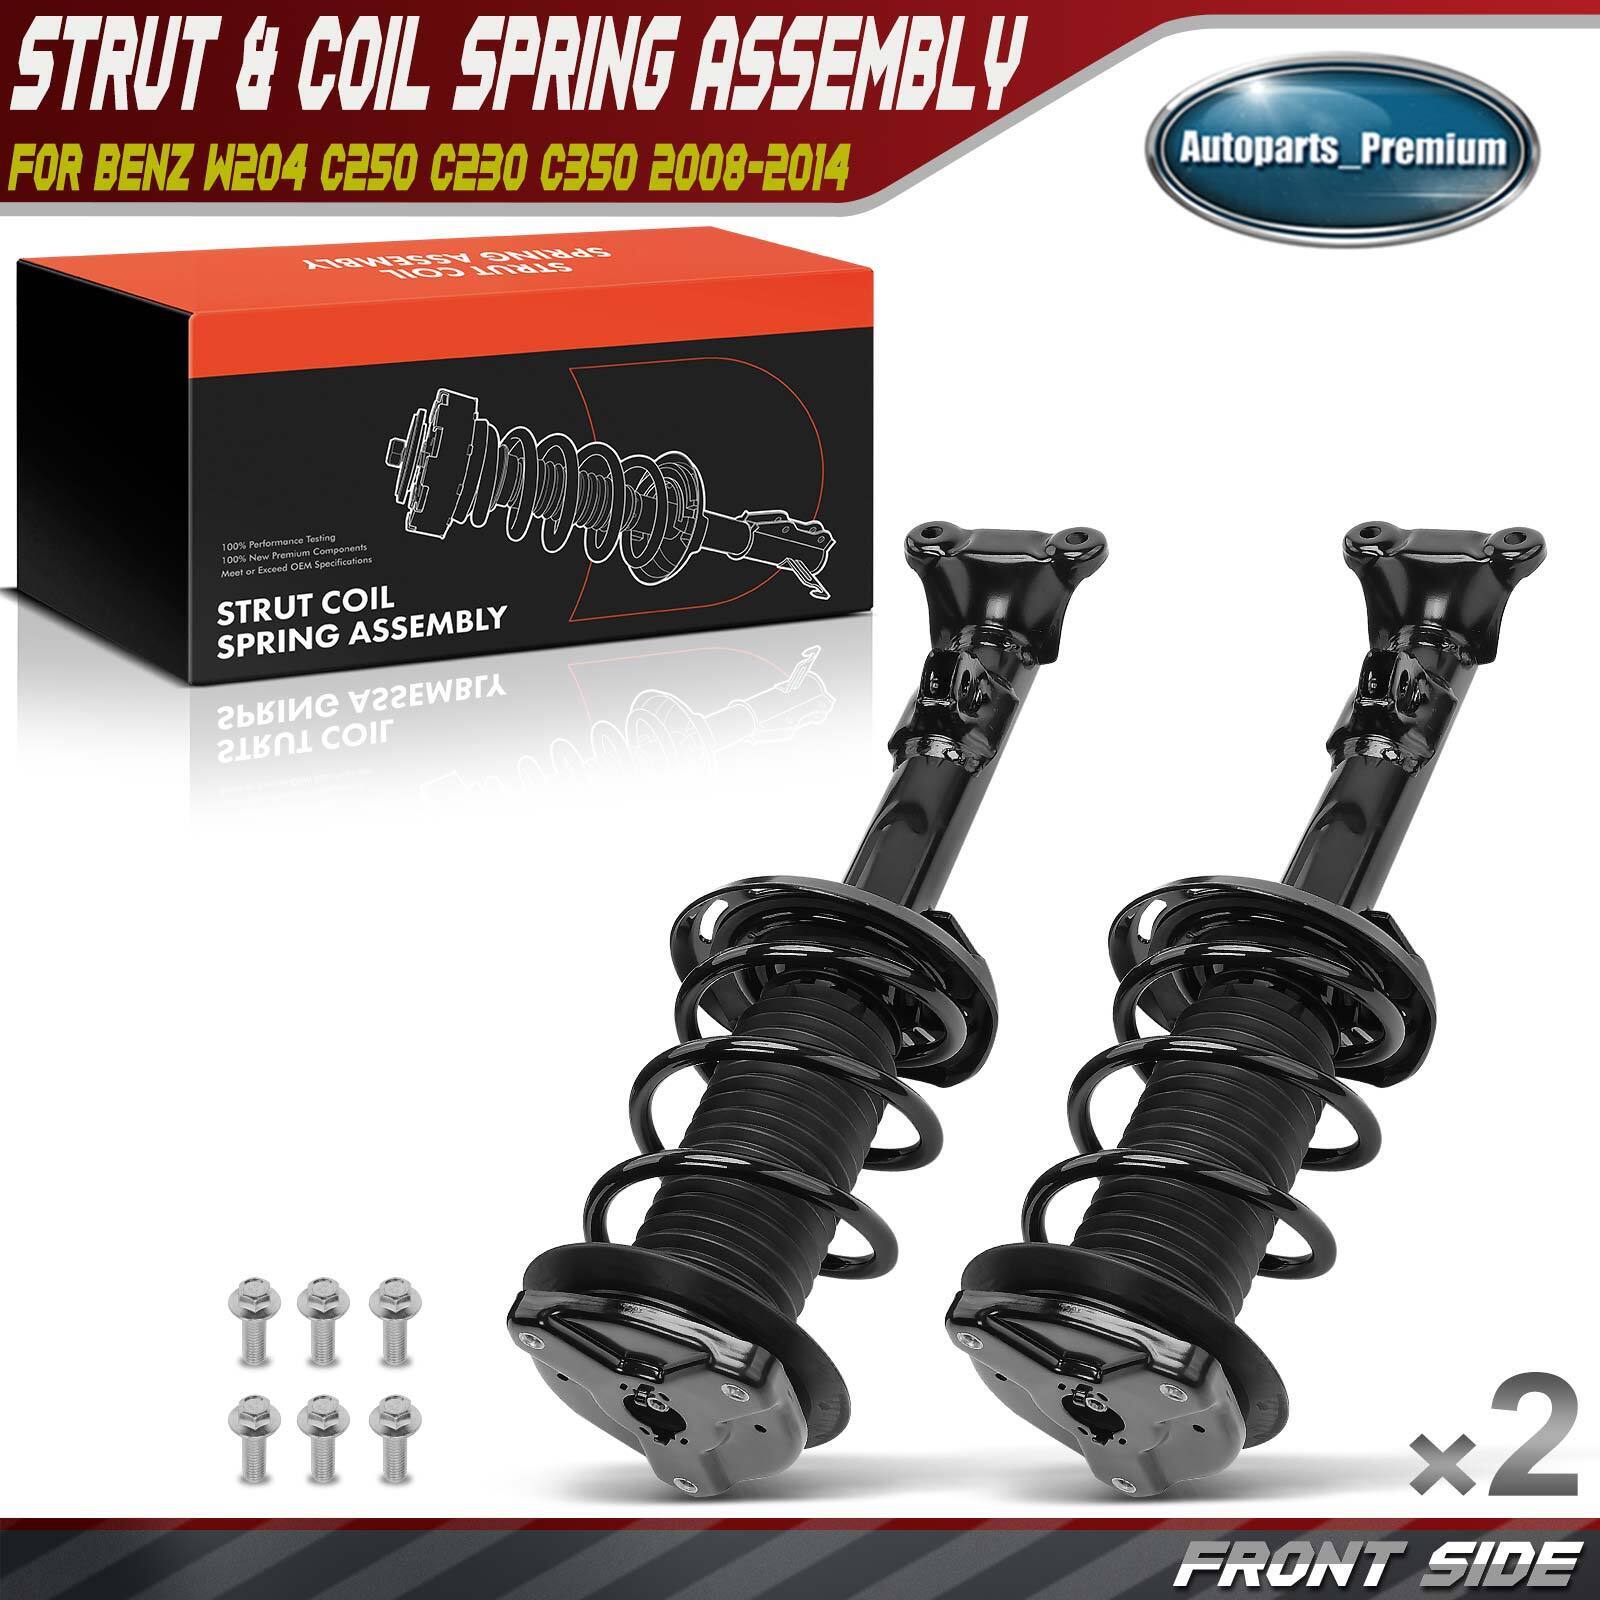 2x Front Complete Strut & Coil Spring Assembly for Mercedes-Benz W204 C250 C230